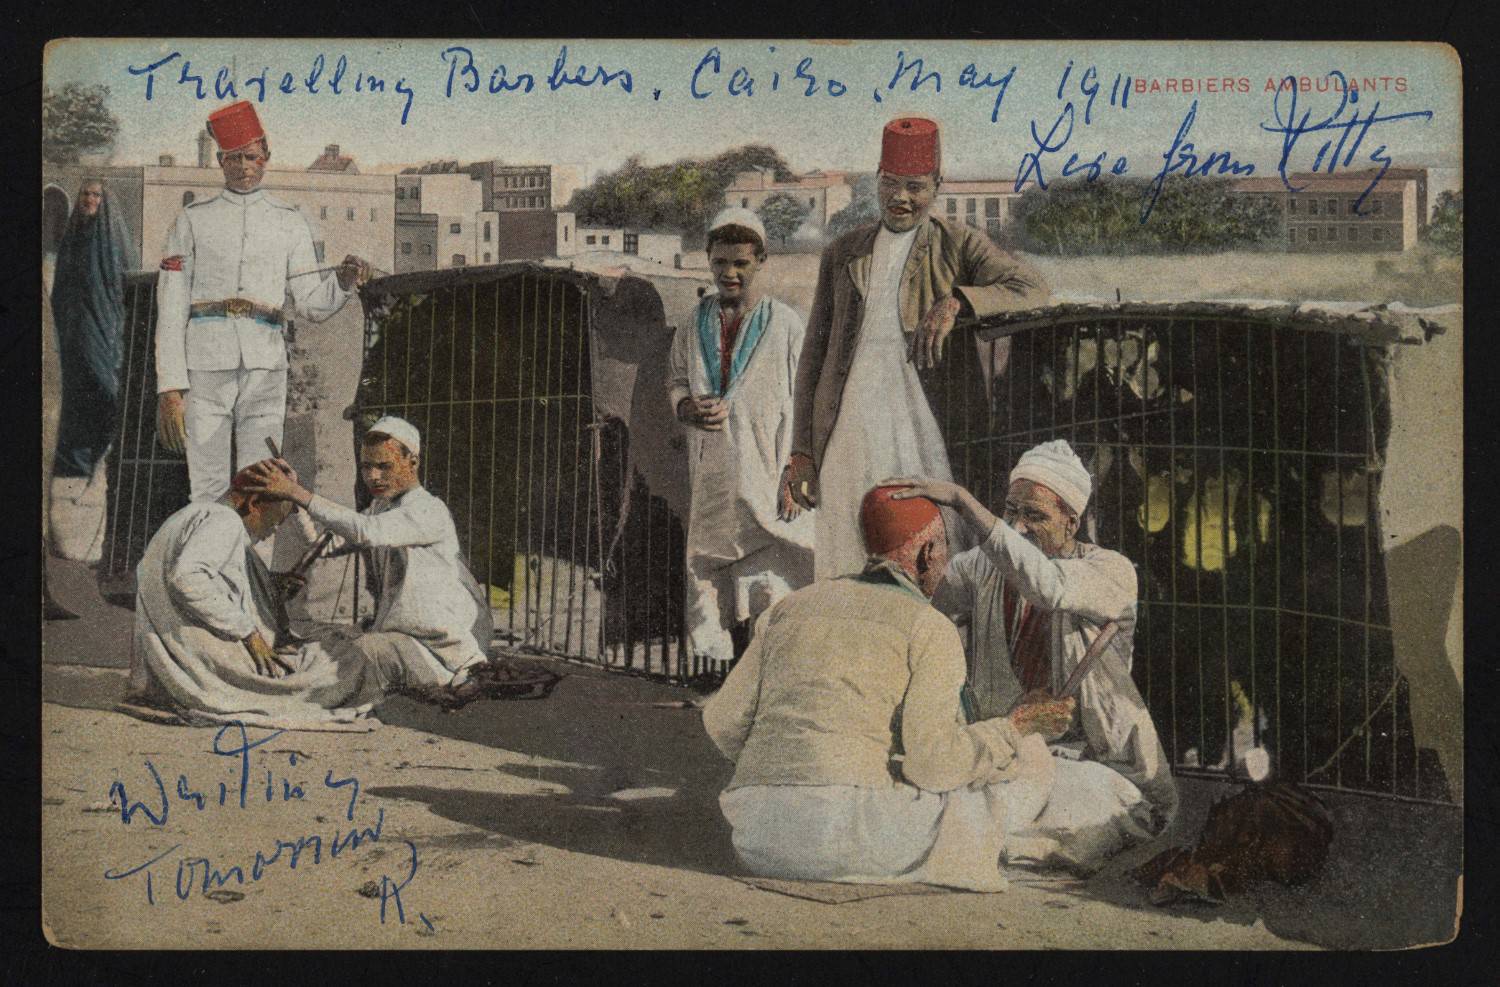 Postcard of traveling barbers, Cairo